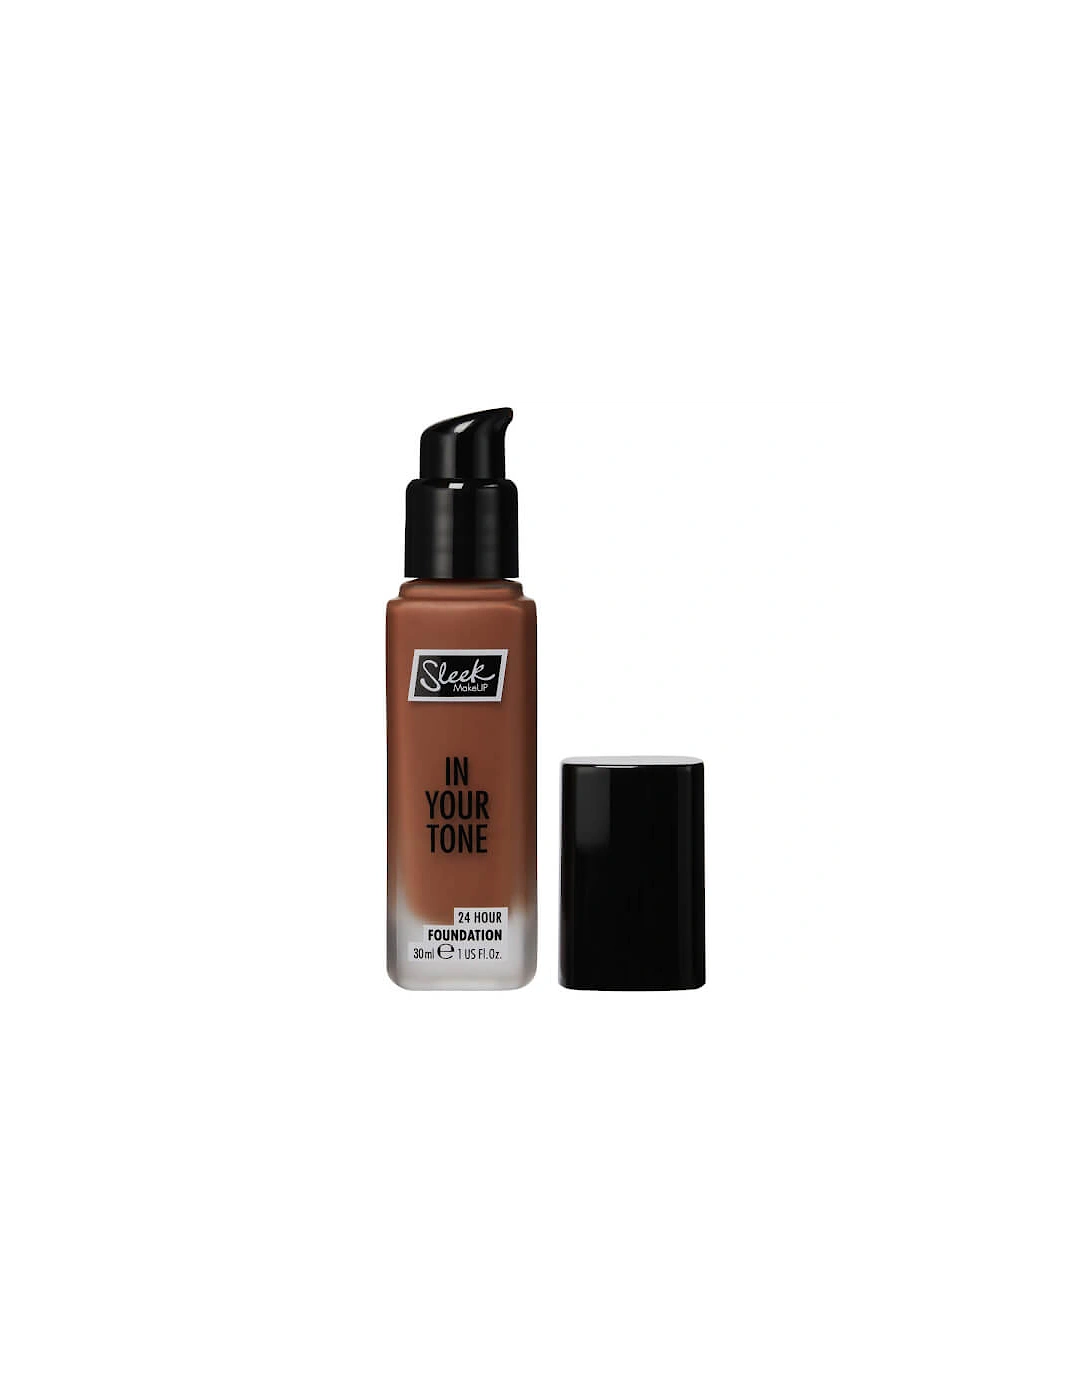 in Your Tone 24 Hour Foundation - 10C, 2 of 1